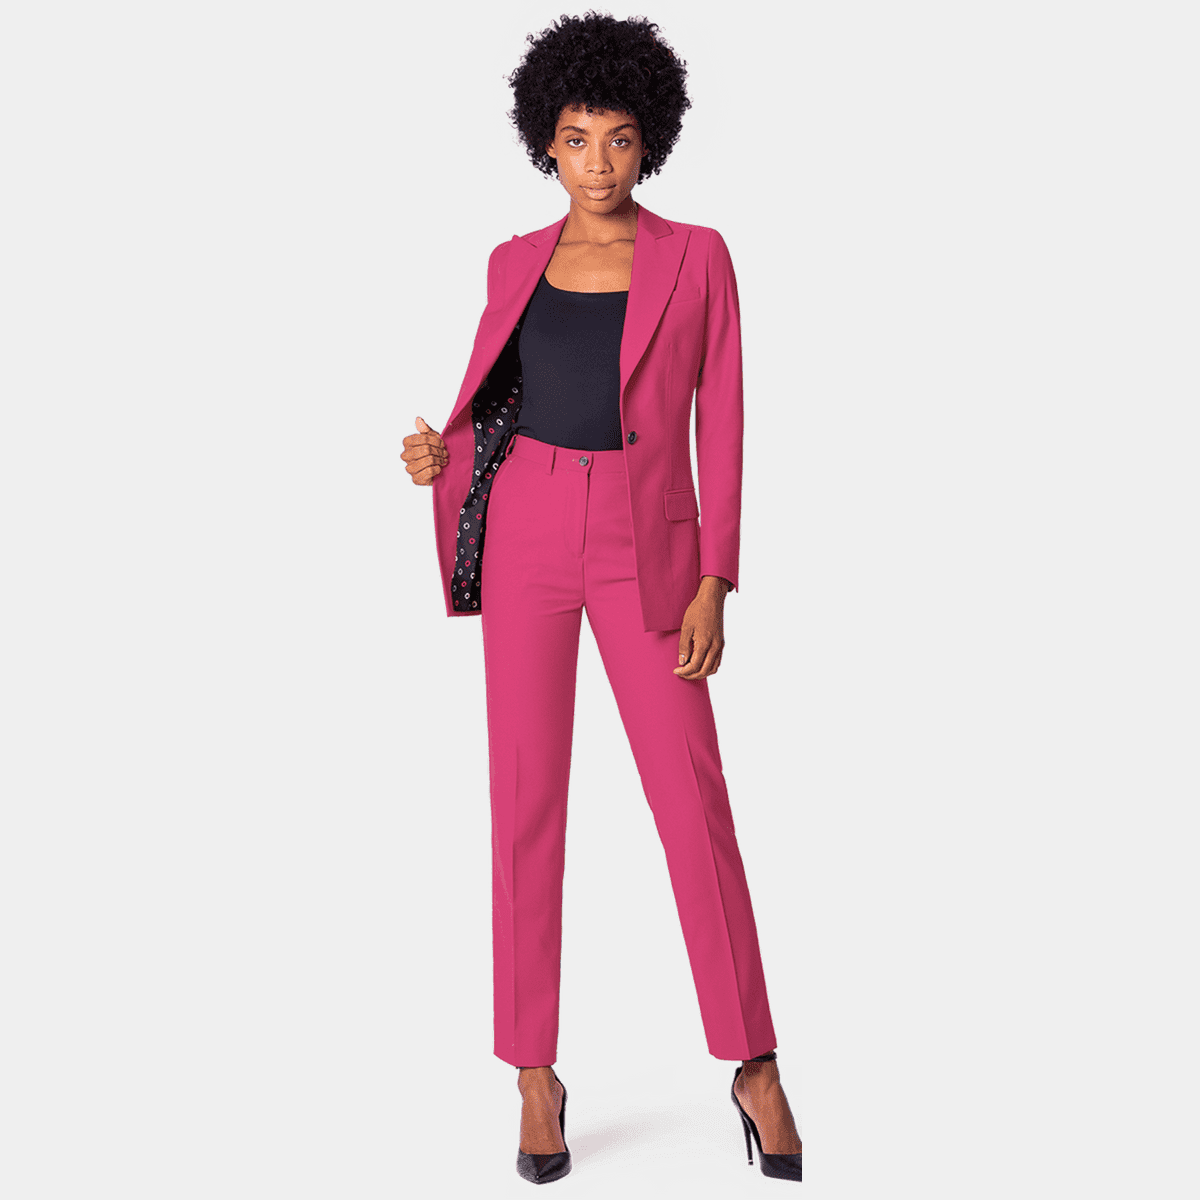 Hot Pink Suit for Women | Sumissura